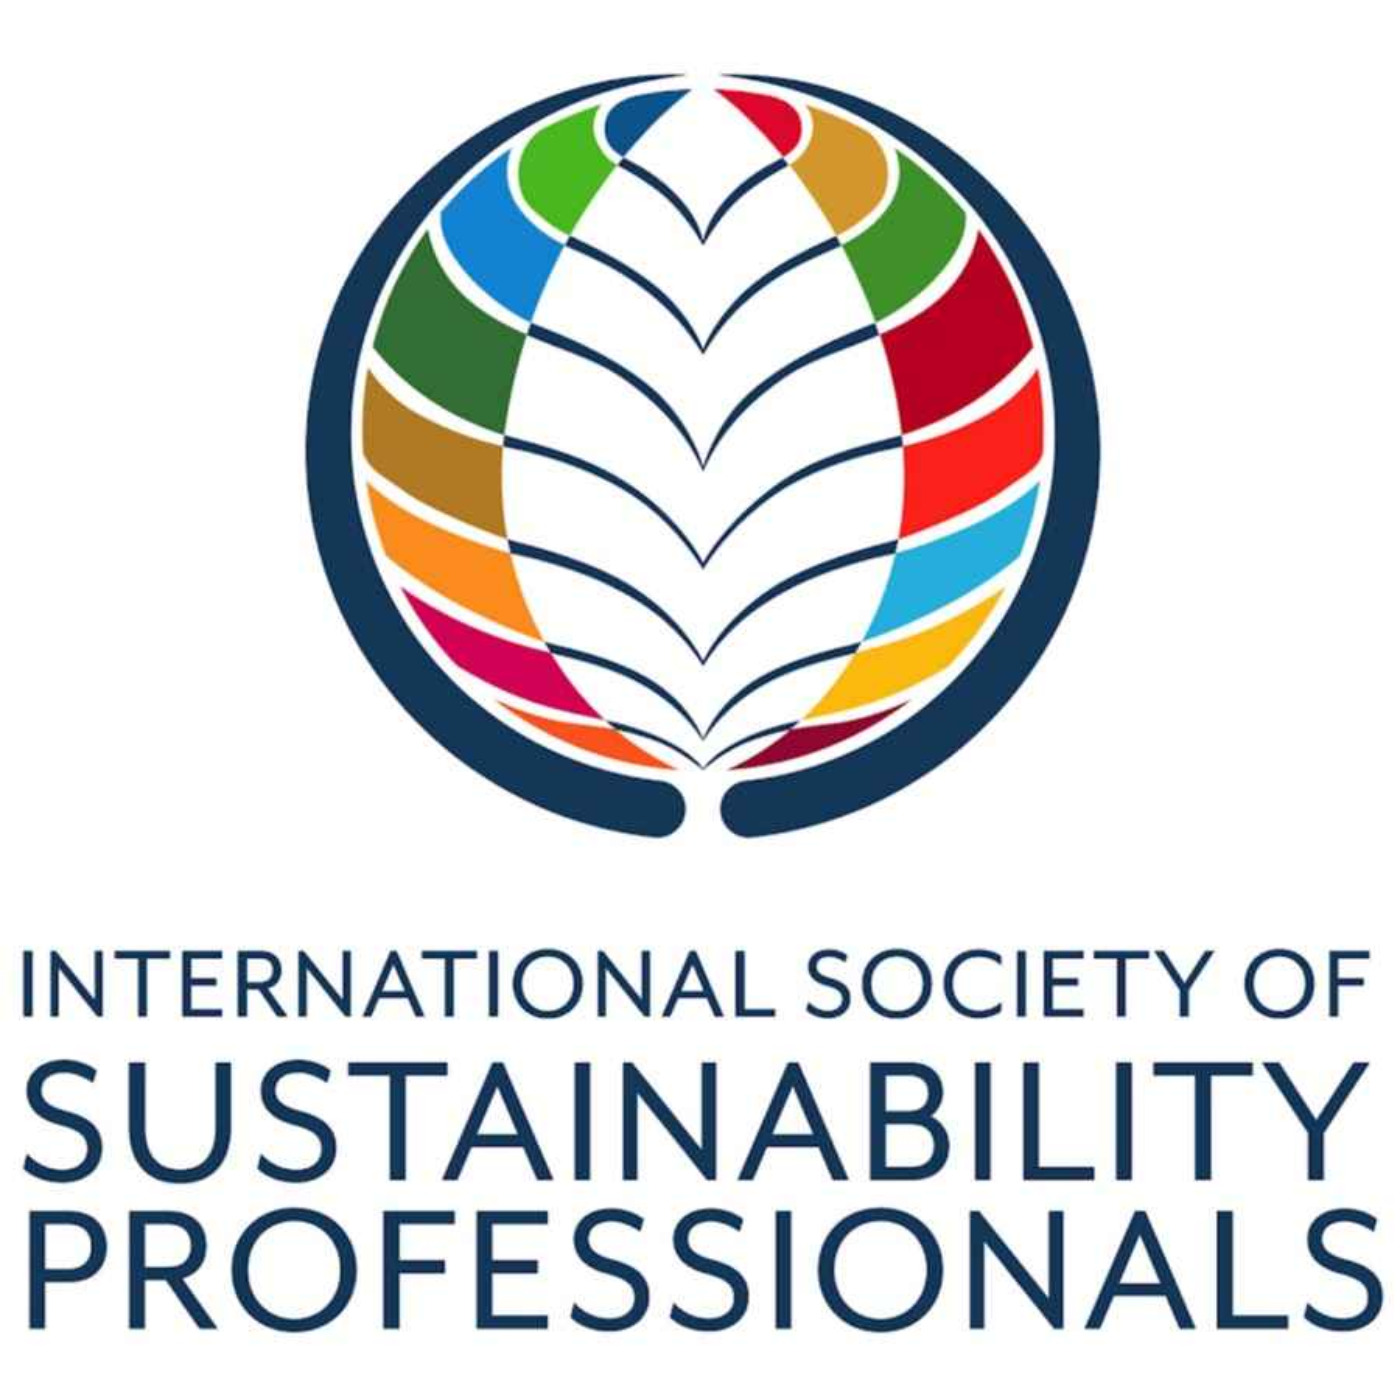 678: My talk to the International Society of Sustainability Professionals